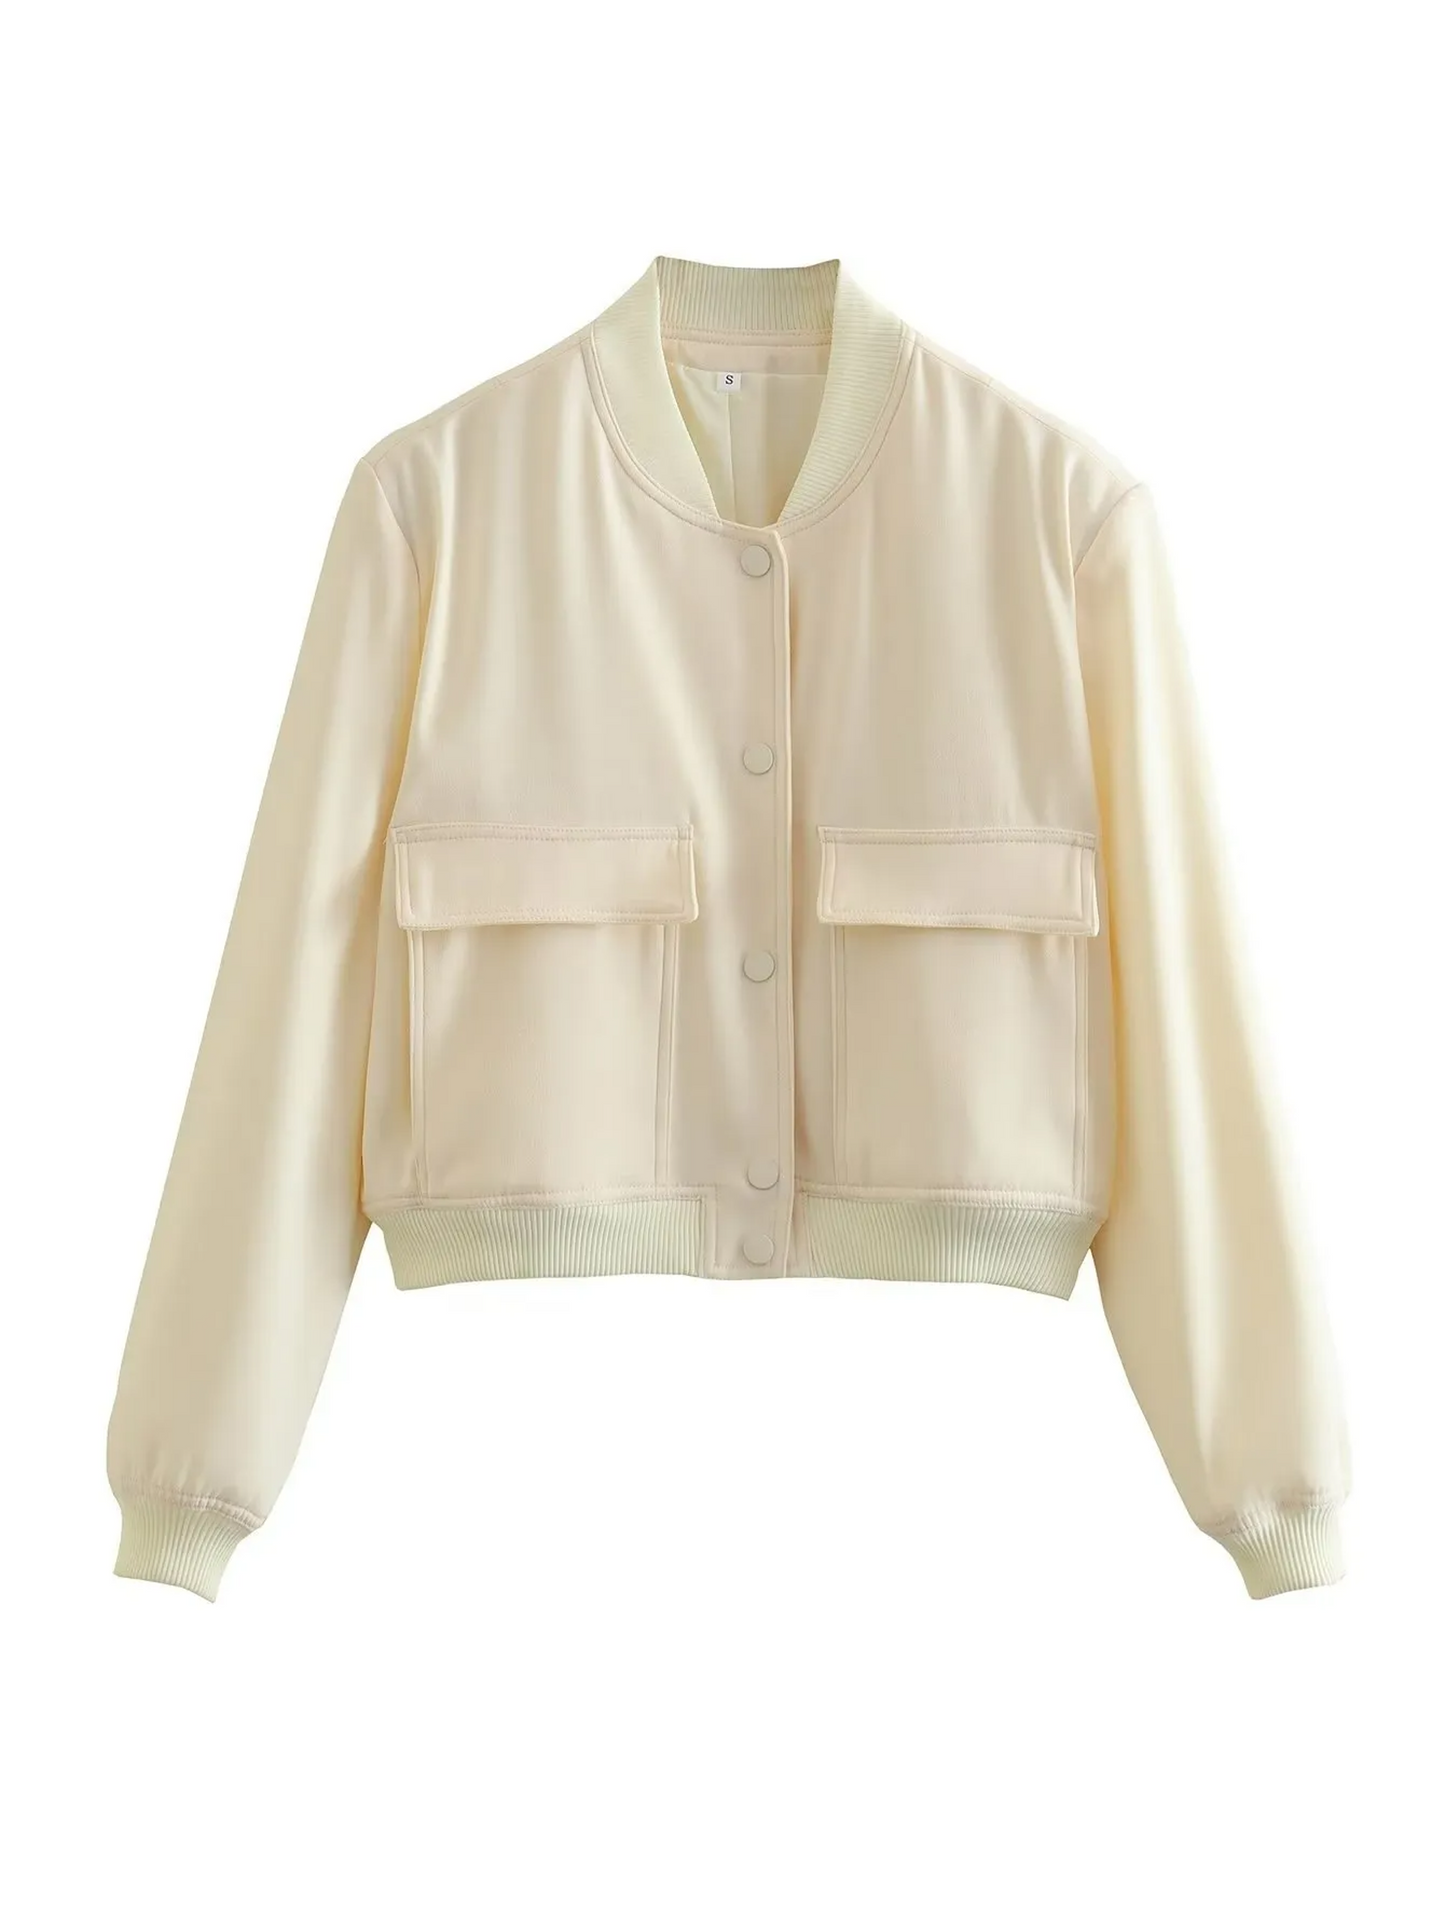 Casual Cropped Bomber Jacket for Women with Multiple Color Options